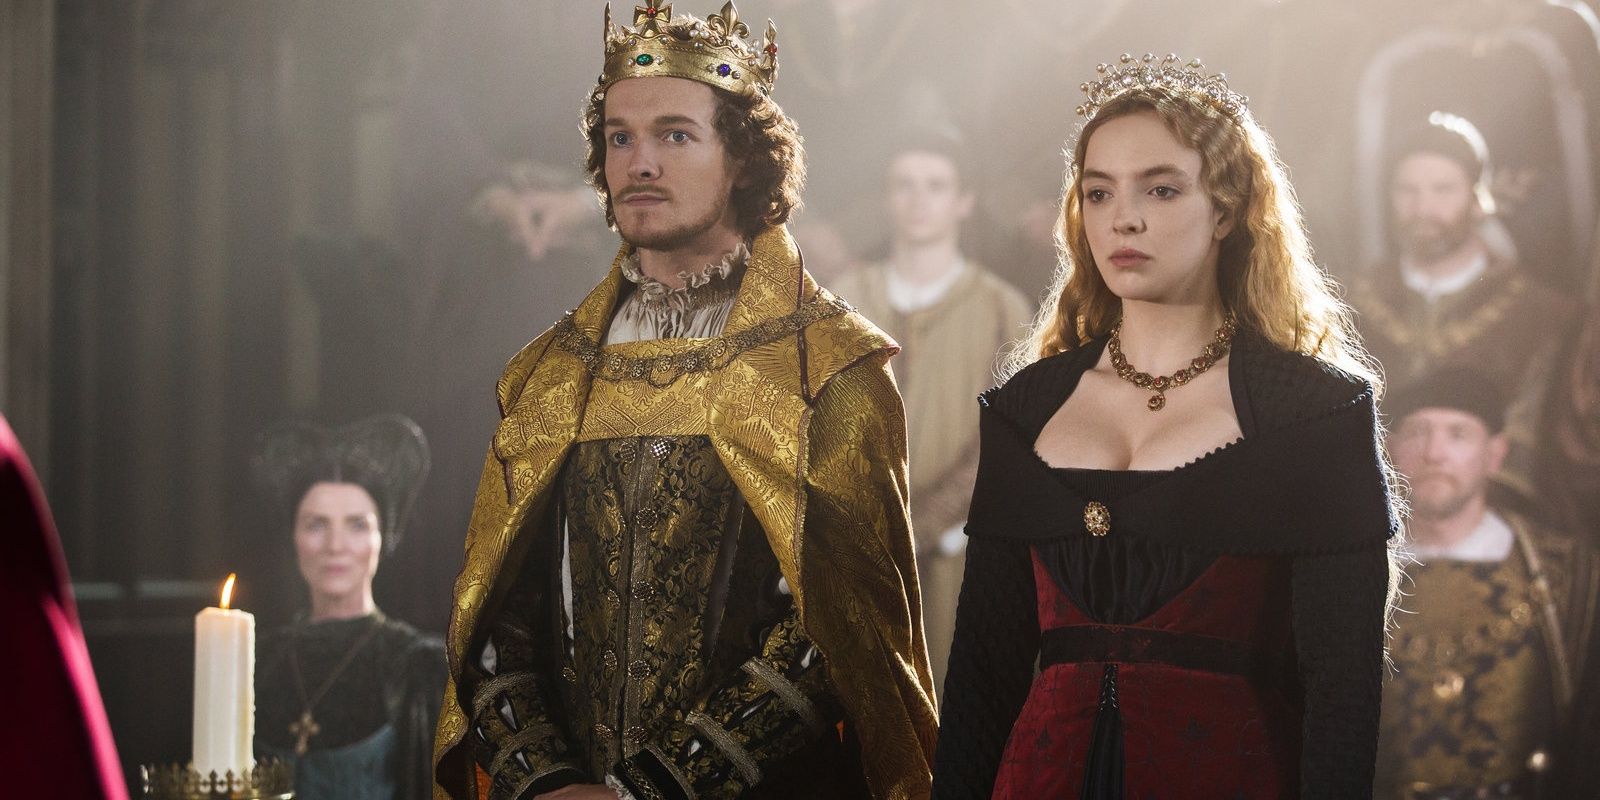 Jodie Comer as Elizabeth with Henry VII in The White Princess